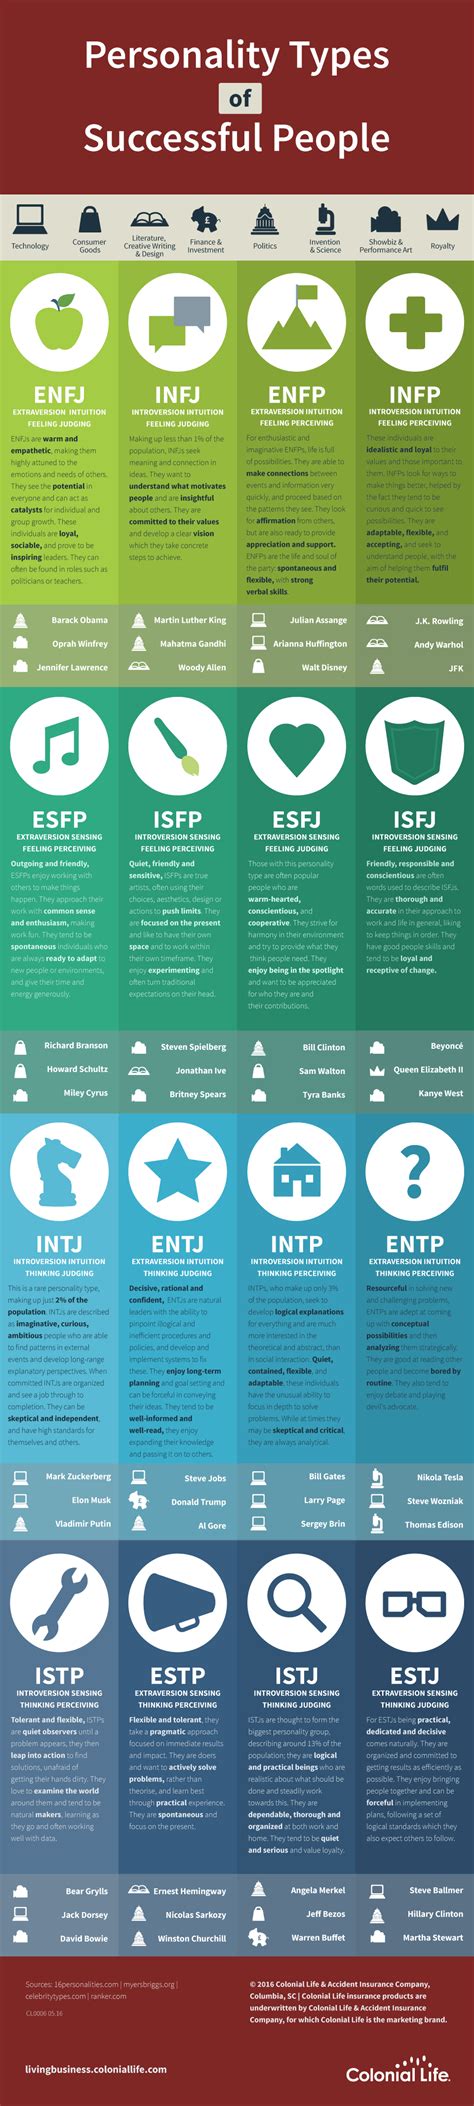 Personality Types Of Successful People Infographic